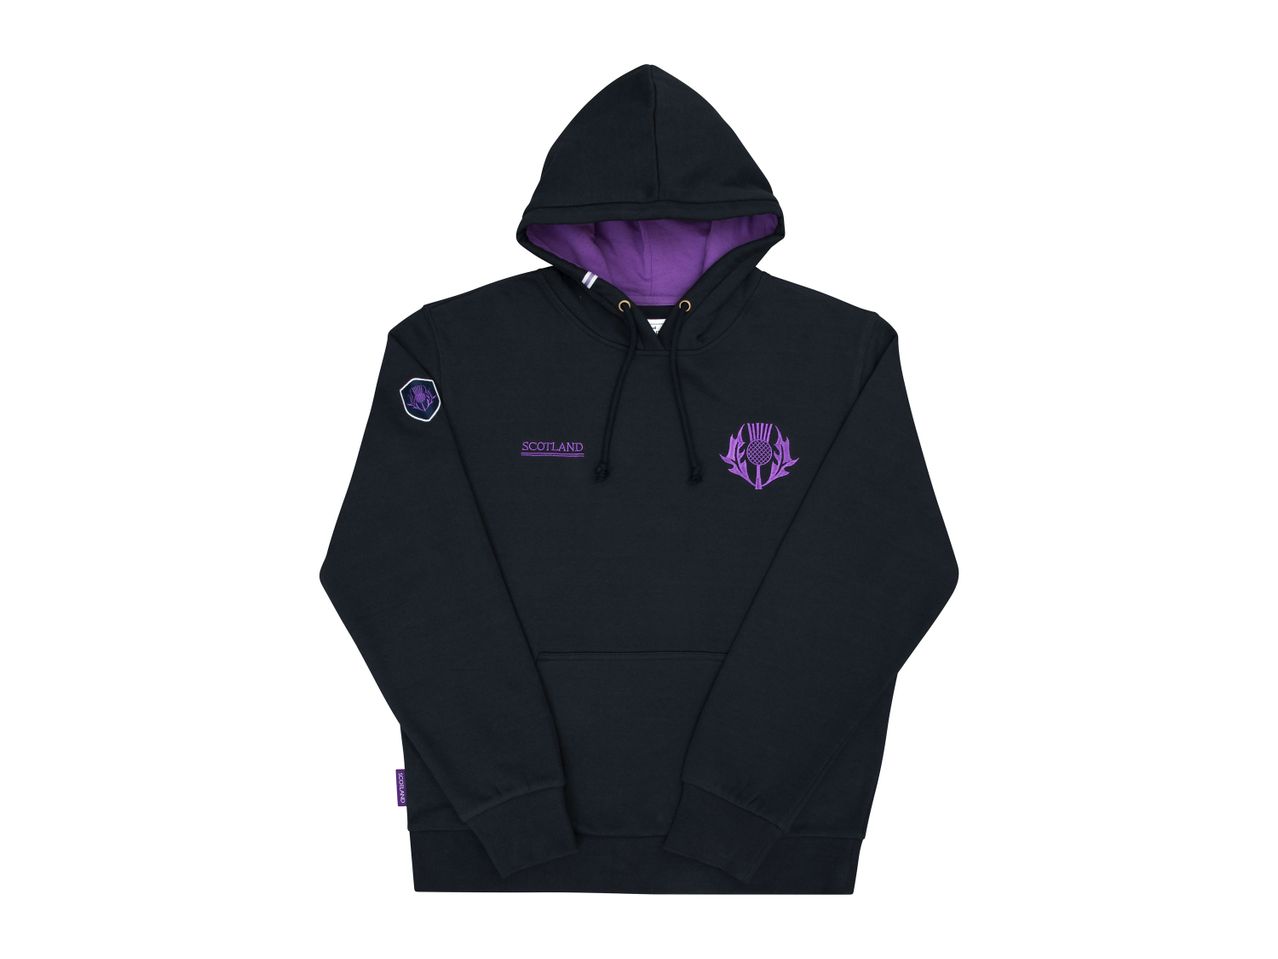 Go to full screen view: Adults’ Scotland Rugby Hoodie - Image 2